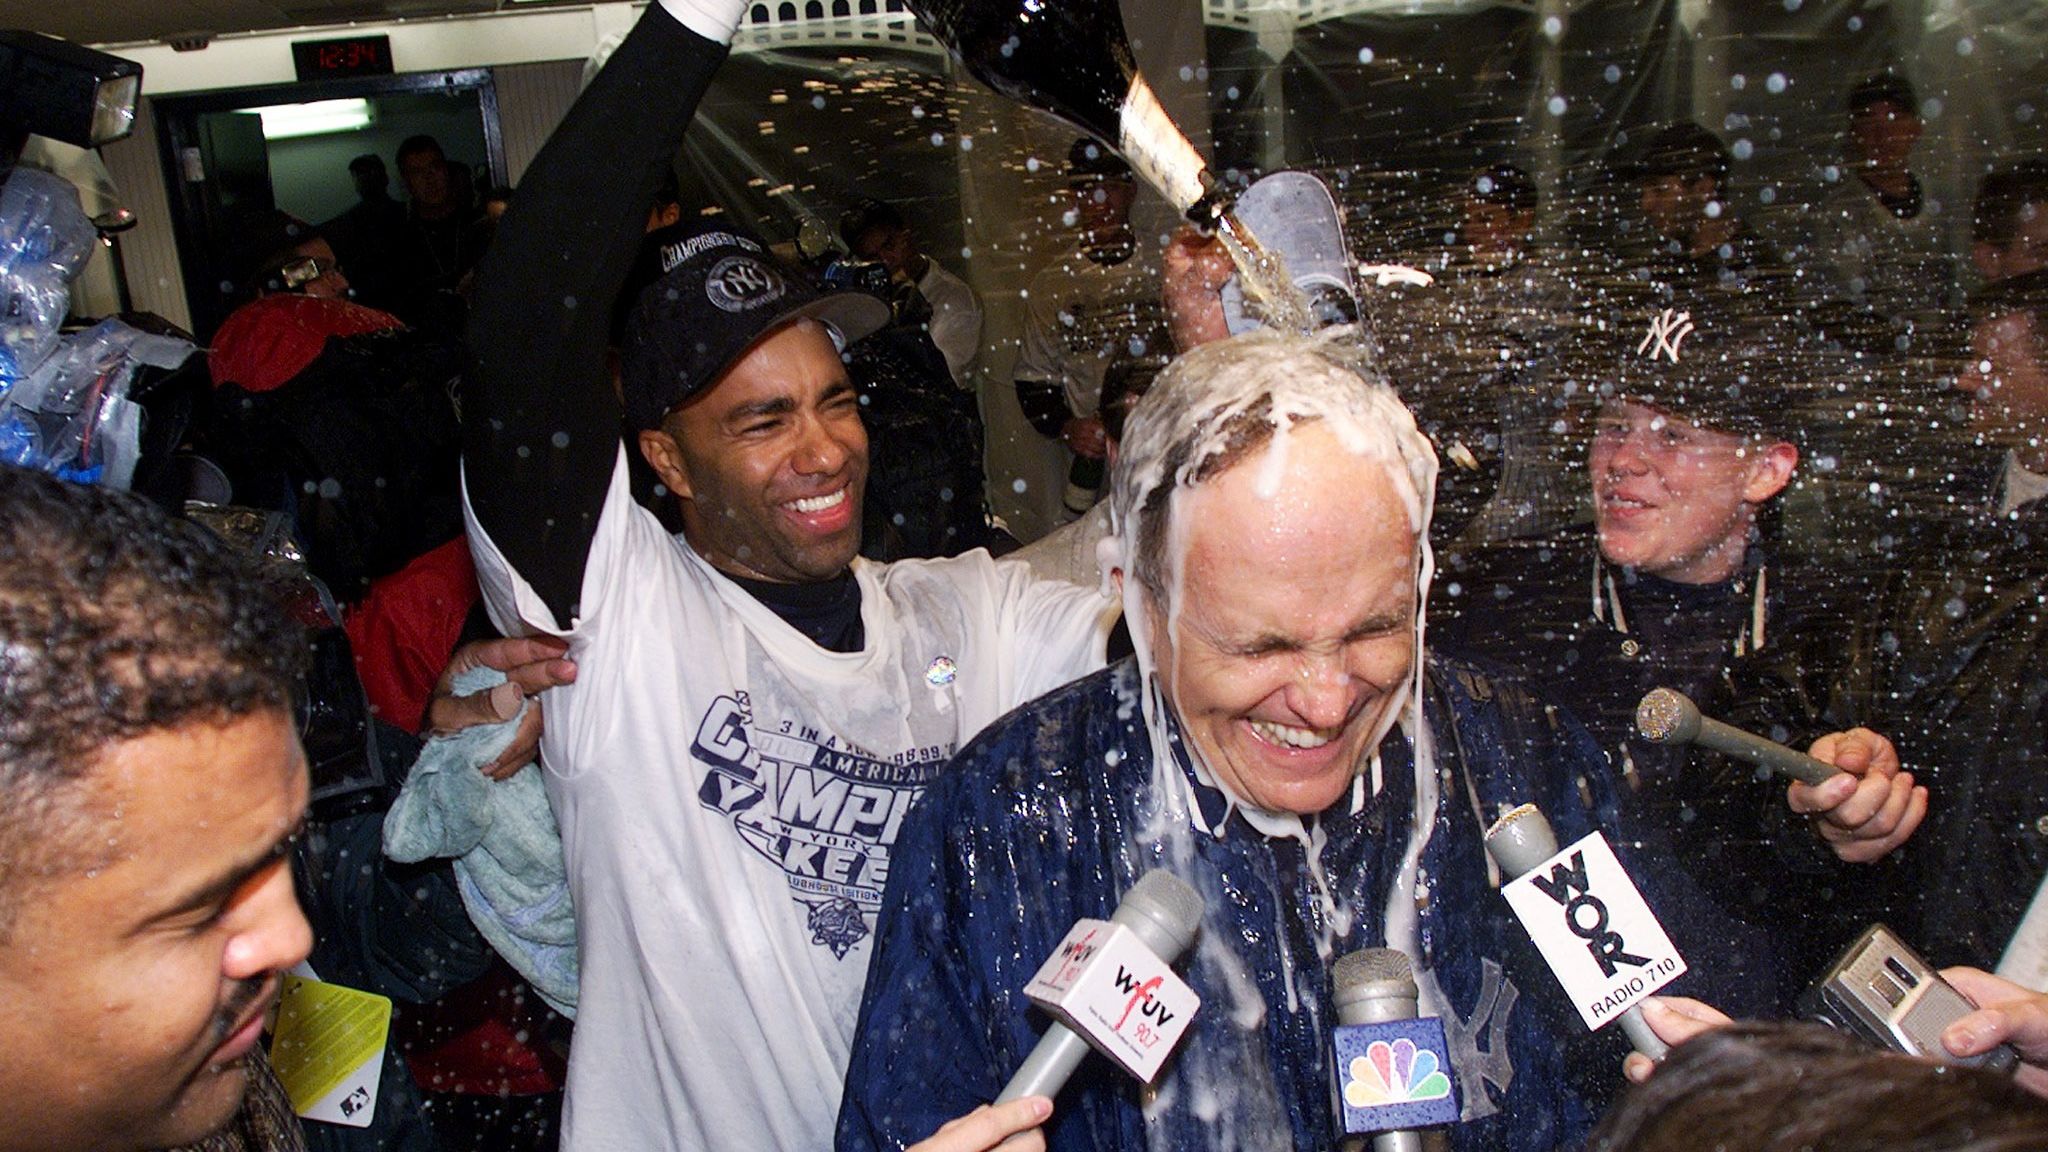 Giuliani gets doused with champagne after the New York Yankees won the American League pennant in October 2000.